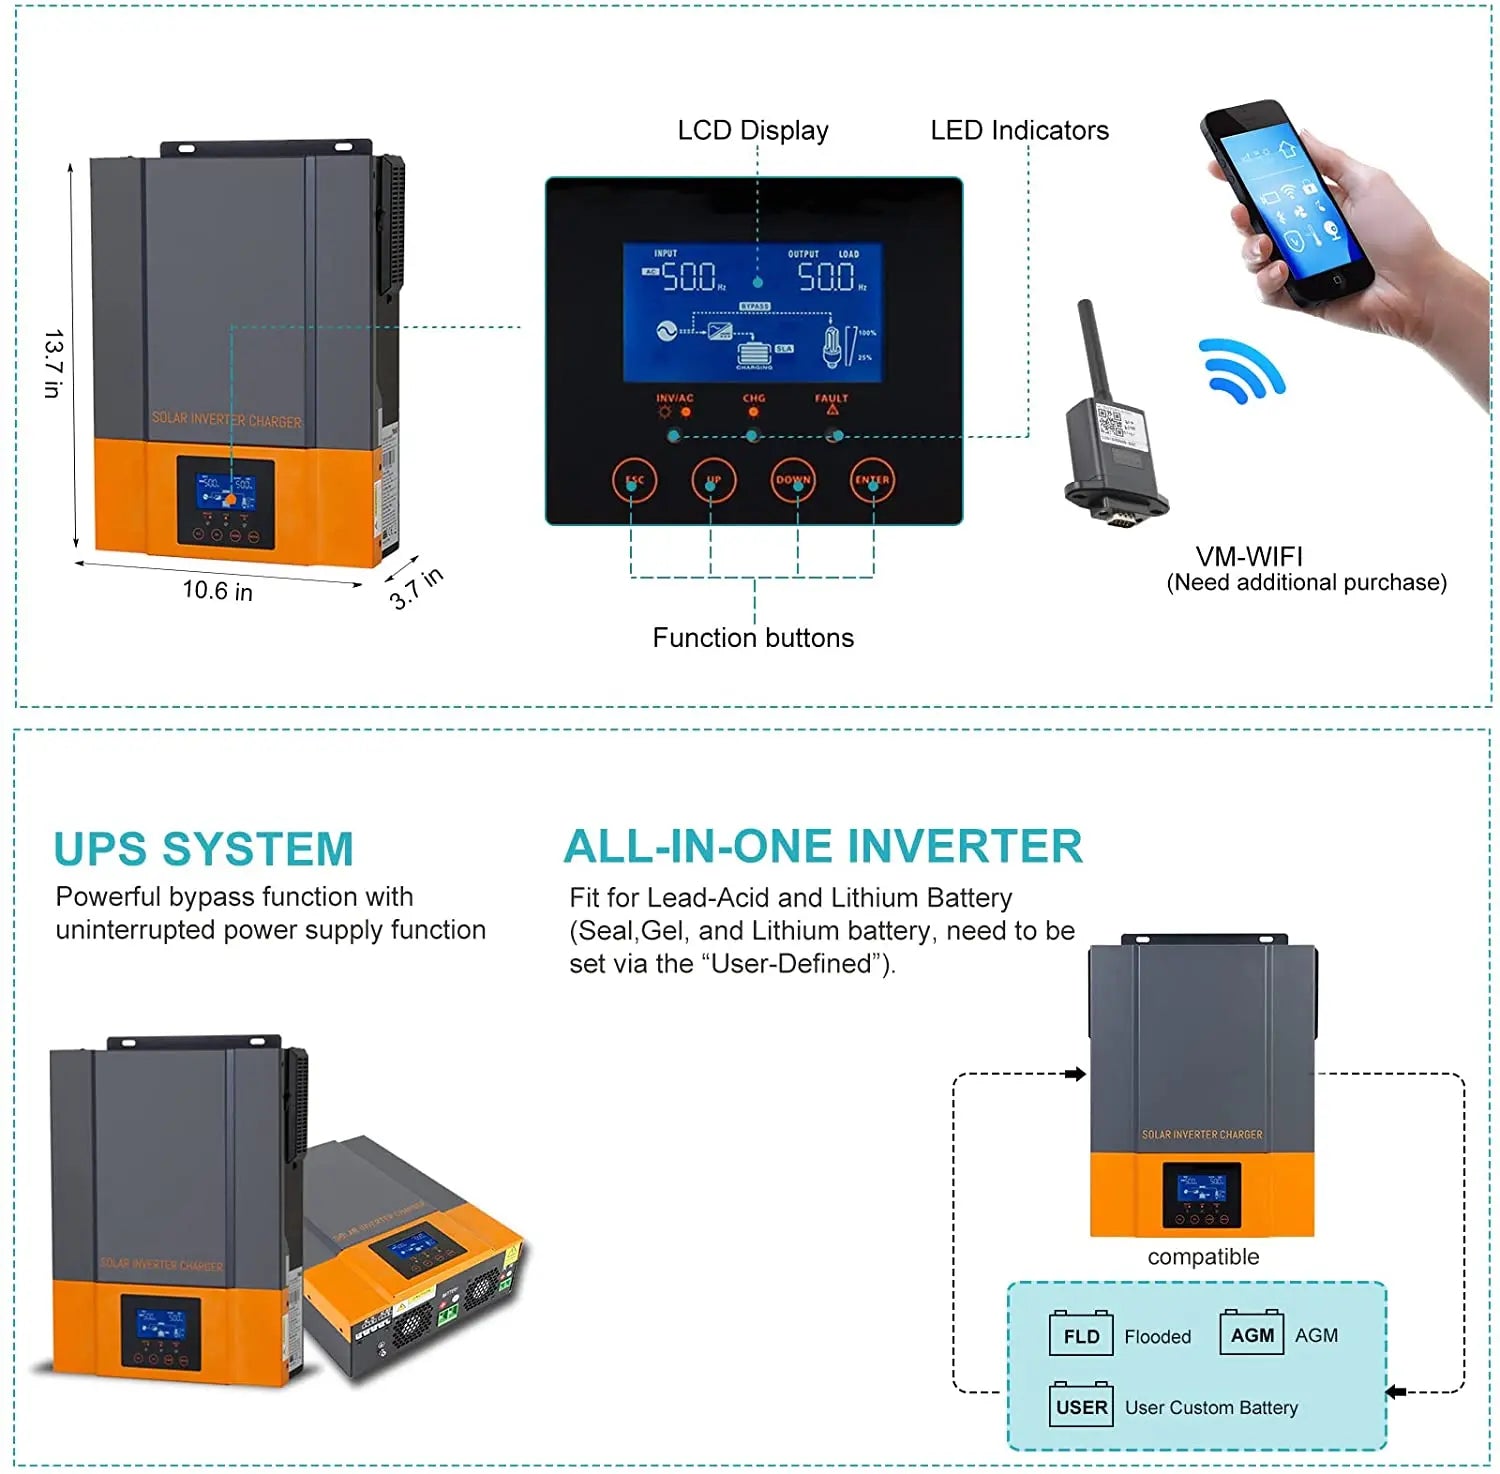 PowMr Hybrid Solar Inverter: all-in-one inverter with built-in MPPT controller, LCD display, Wi-Fi connectivity, and bypass function.